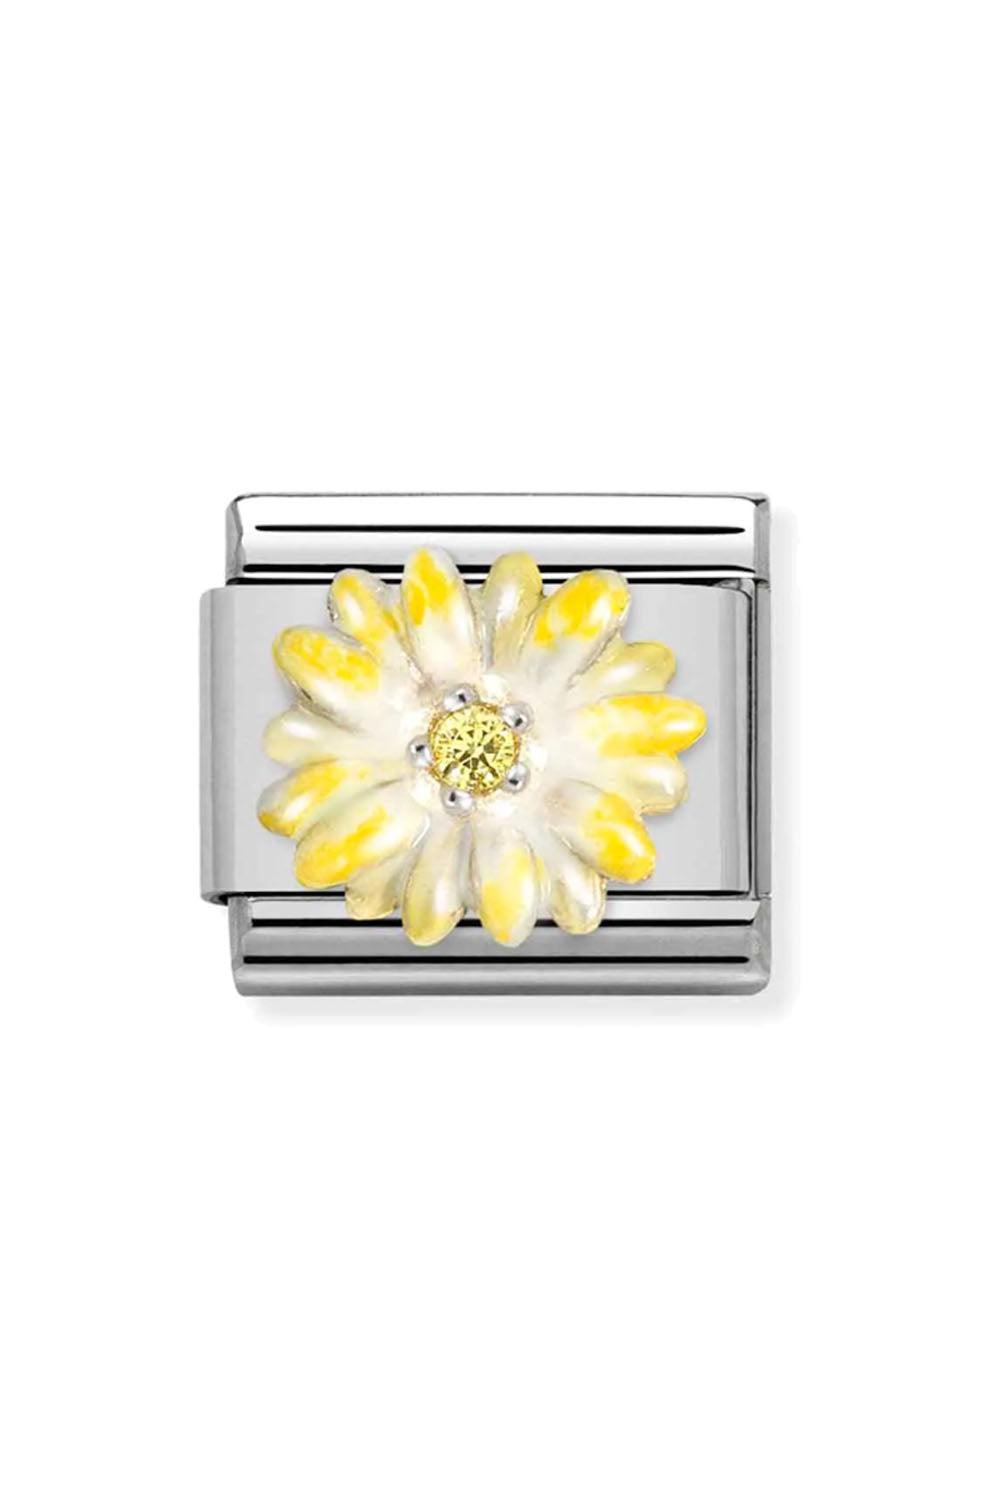 Symbols 925 Sterling Silver with Enamel and CZ yellow flower